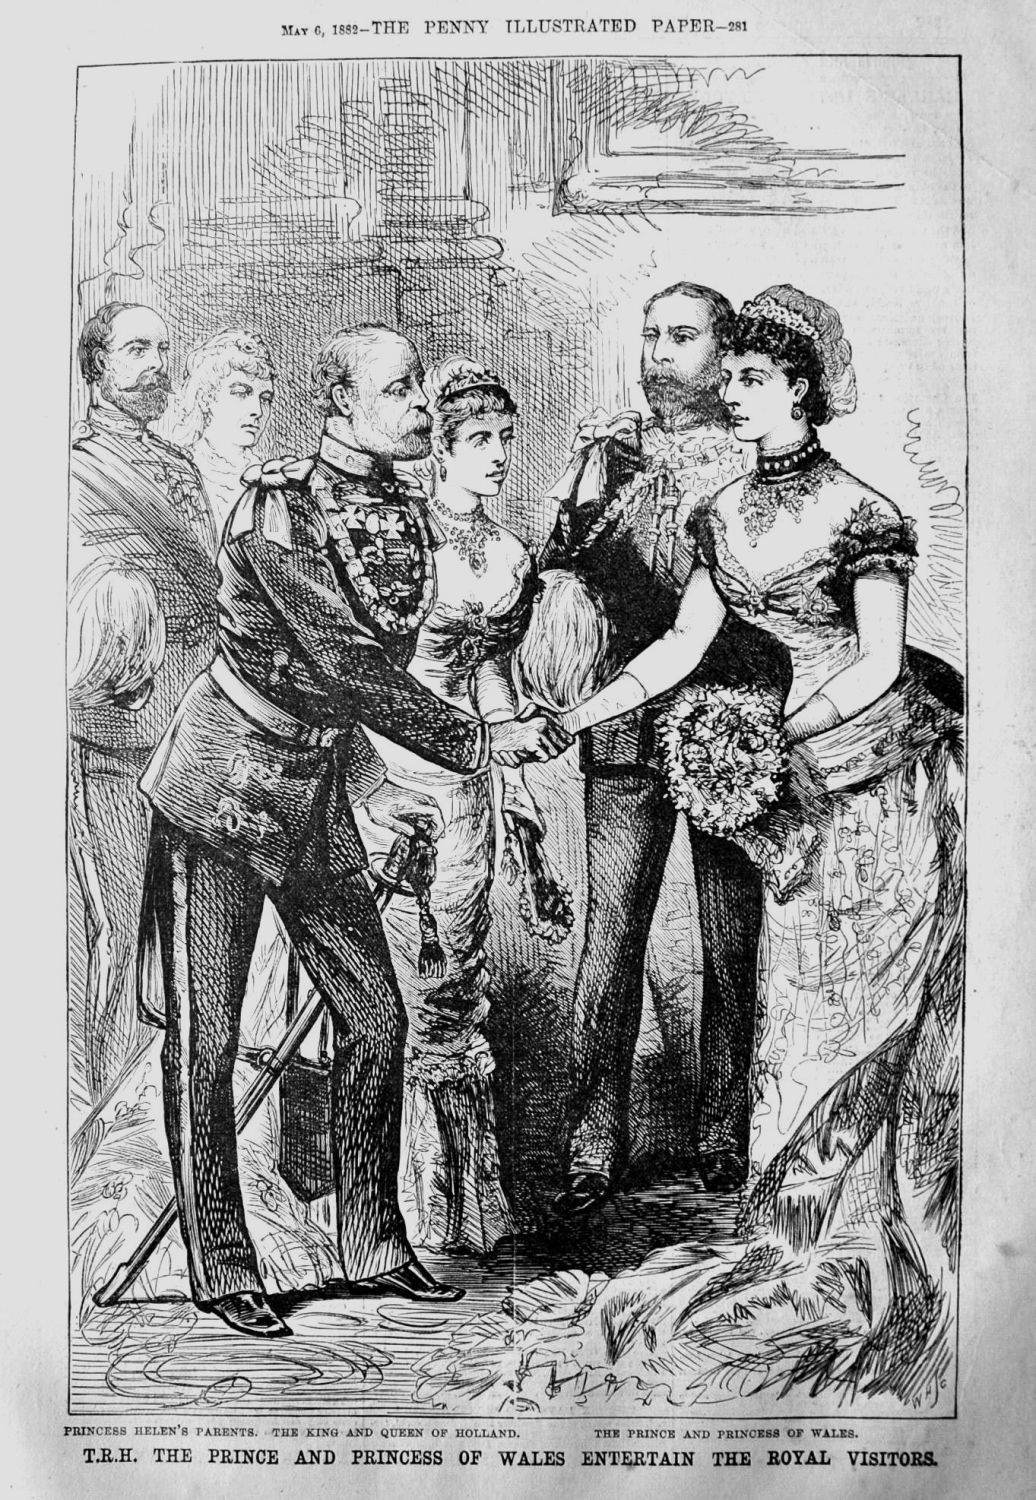 T.R.H. The Prince and Princess of Wales Entertain the Royal Visitors.  1882